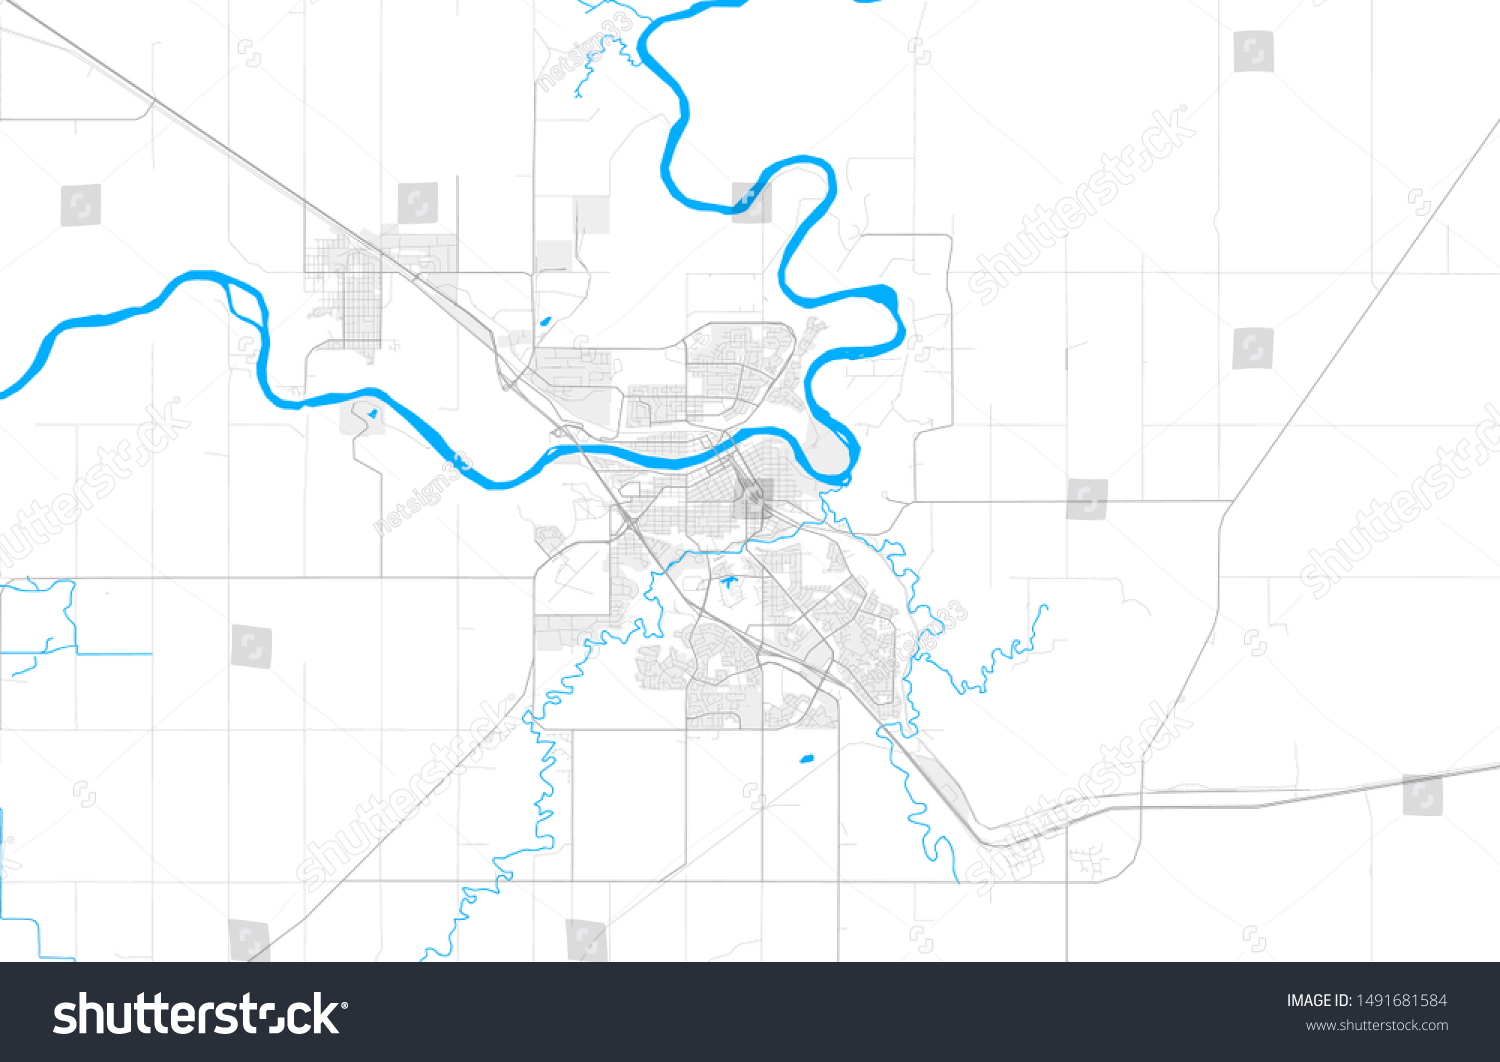 Rich Detailed Vector Area Map Medicine Royalty Free Stock Image